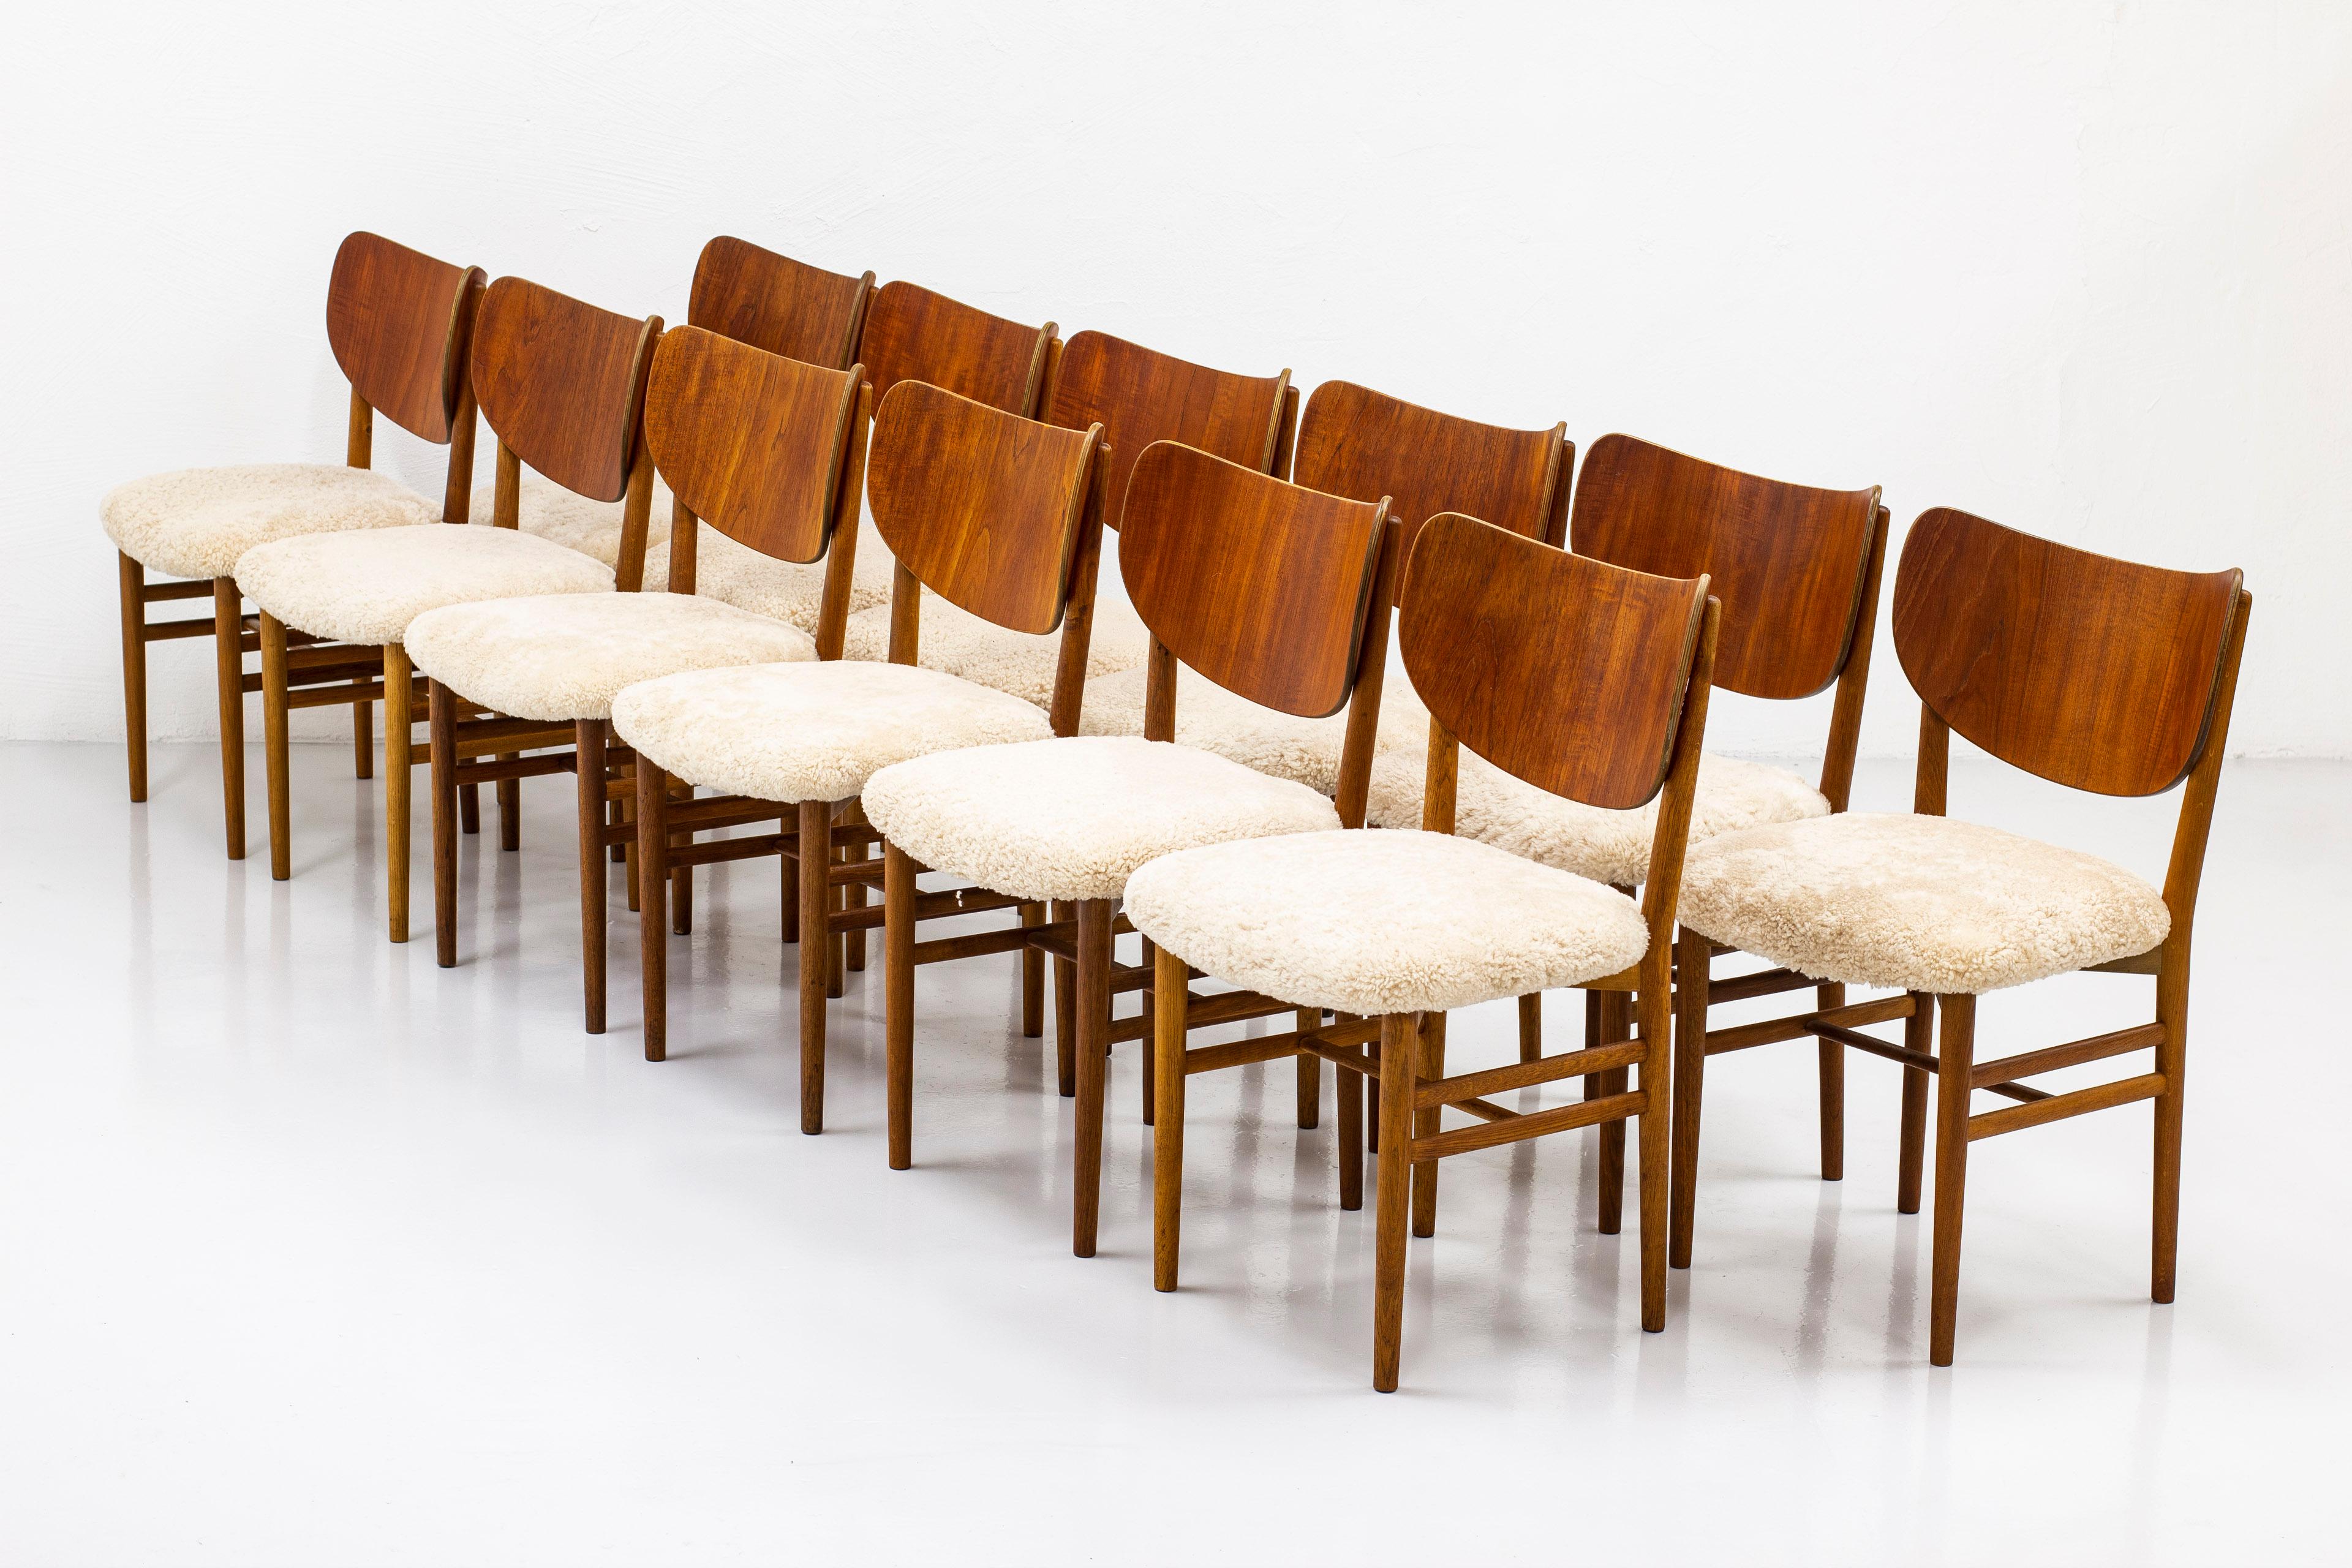 Set of twelve dining chairs designed by Nils & Eva Koppel. Produced in Denmark by Slagelse Møbelvaerk during the 1950s. Made from solid oak in the leg frame and laminated teak in the back rest. Reupholstered with whole sheepskin fur in creme colour.